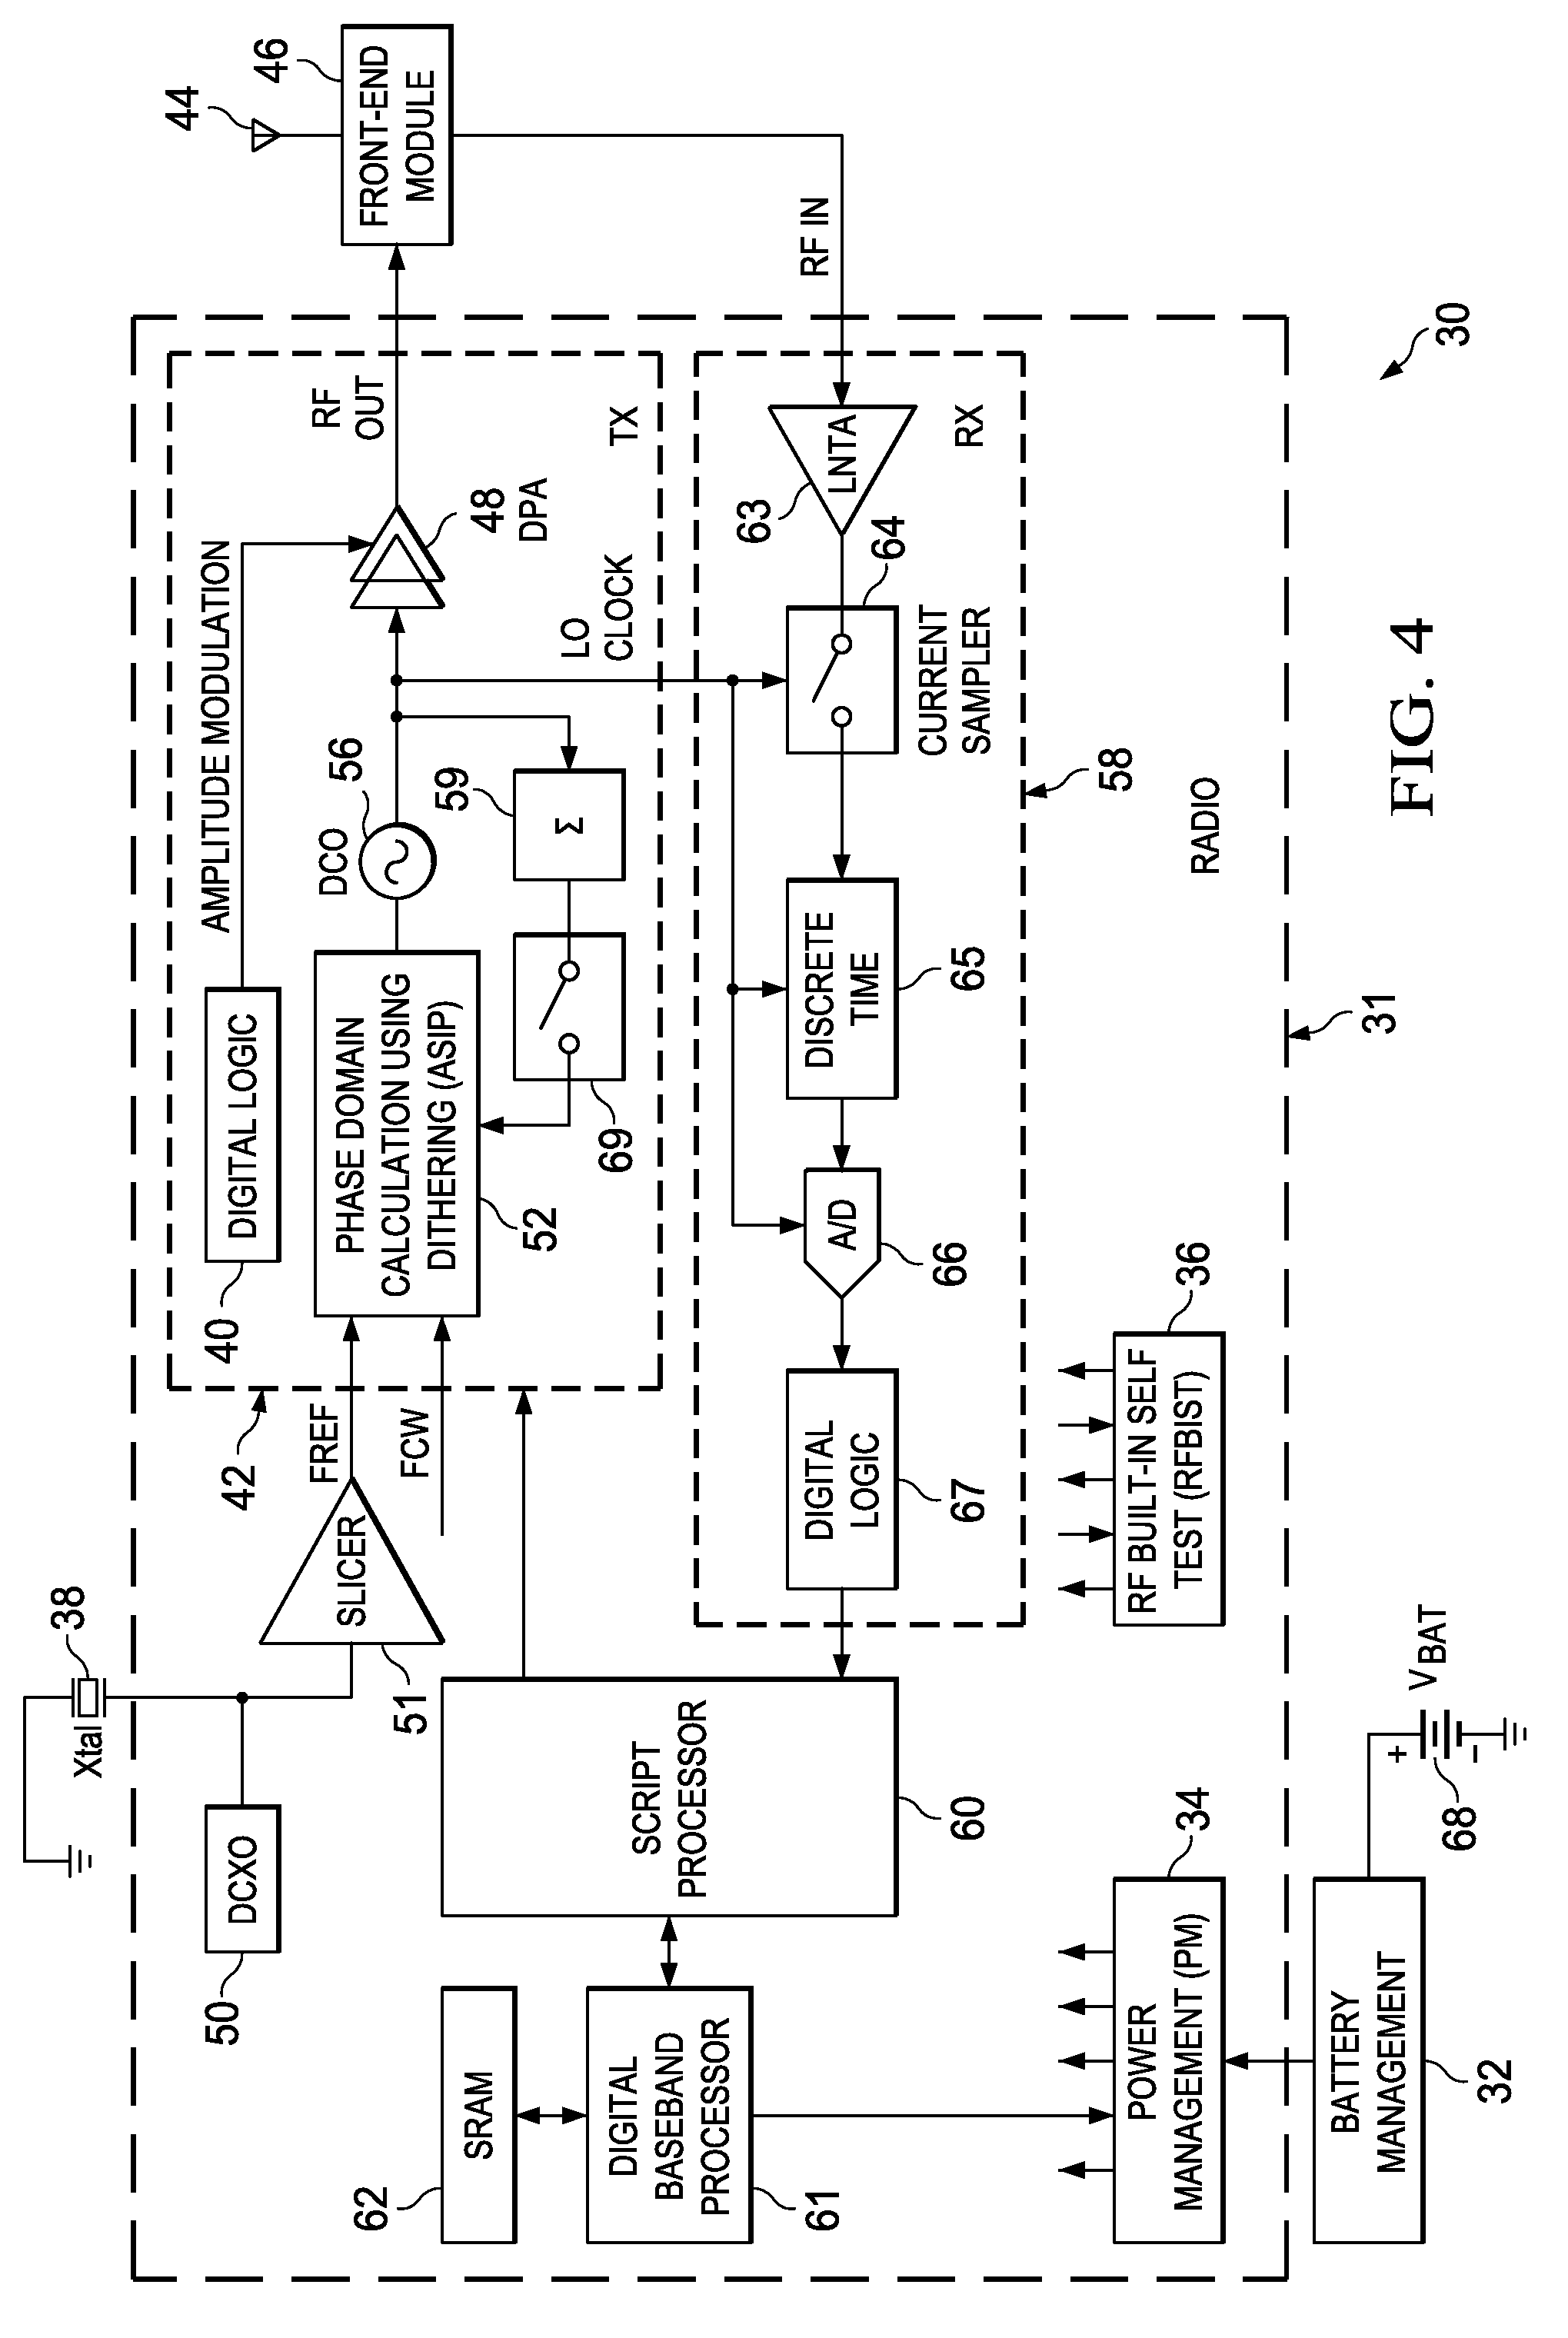 Computation spreading utilizing dithering for spur reduction in a digital phase lock loop